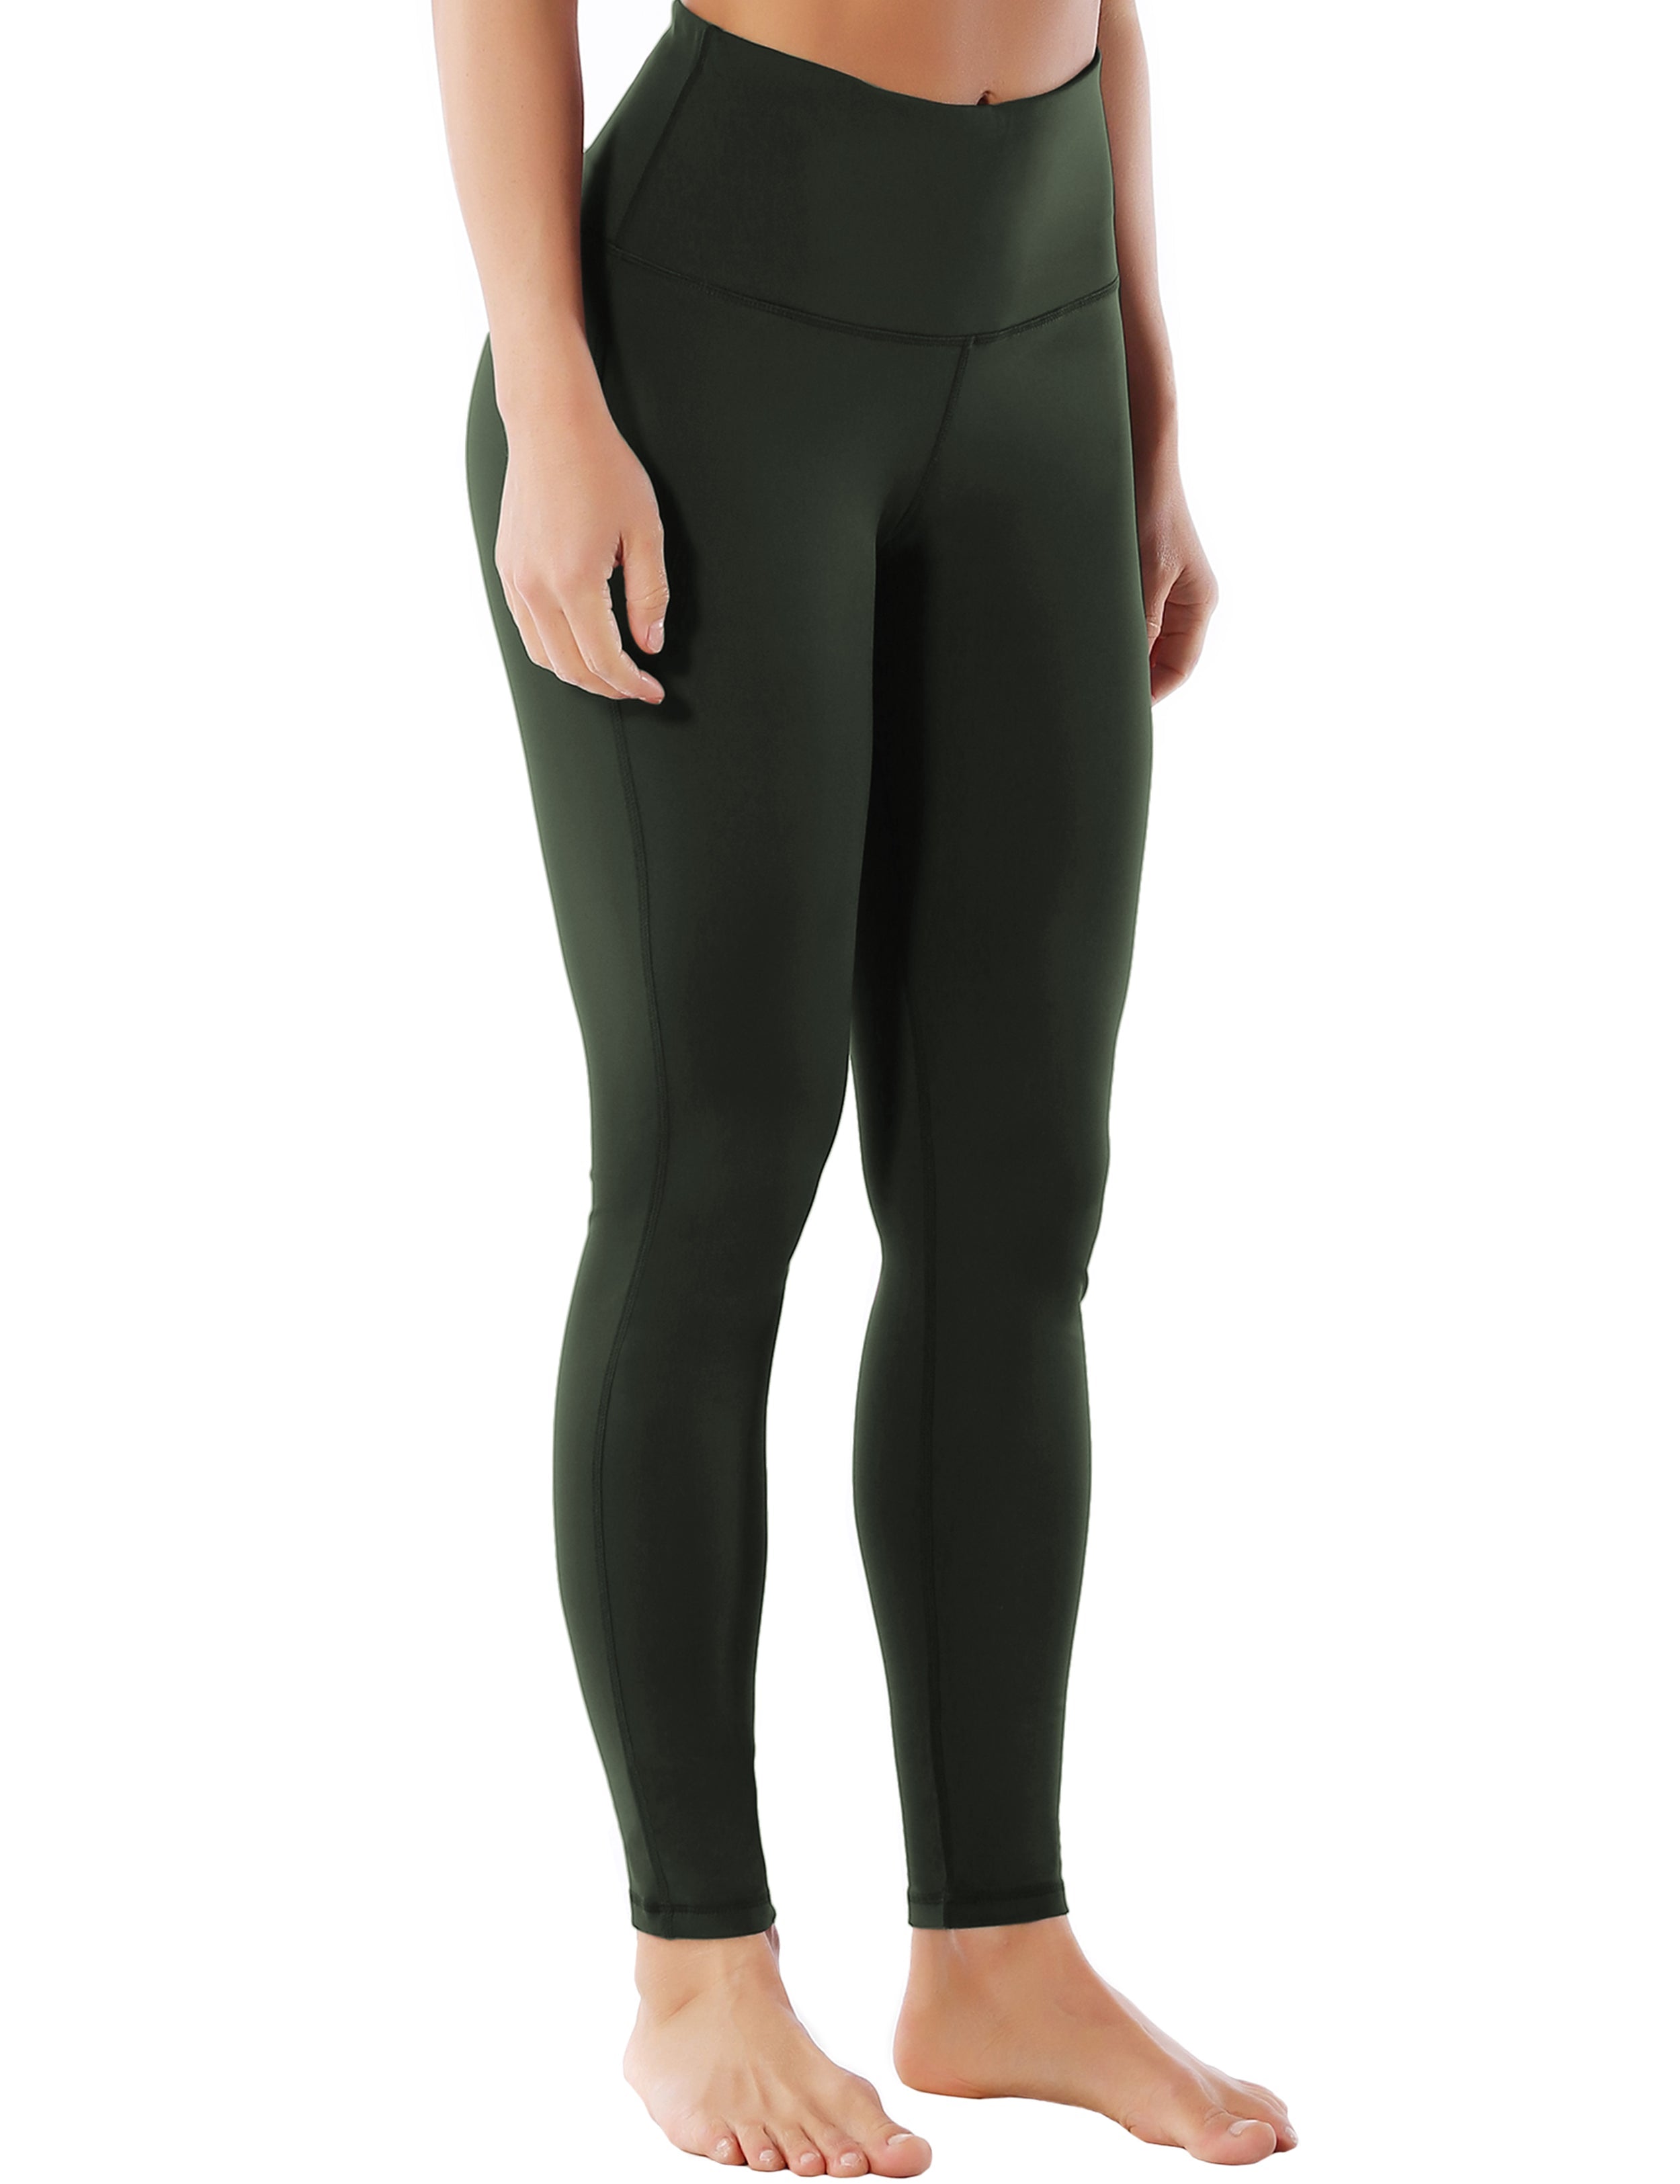 High Waist Side Line Golf Pants olivegray Side Line is Make Your Legs Look Longer and Thinner 75%Nylon/25%Spandex Fabric doesn't attract lint easily 4-way stretch No see-through Moisture-wicking Tummy control Inner pocket Two lengths